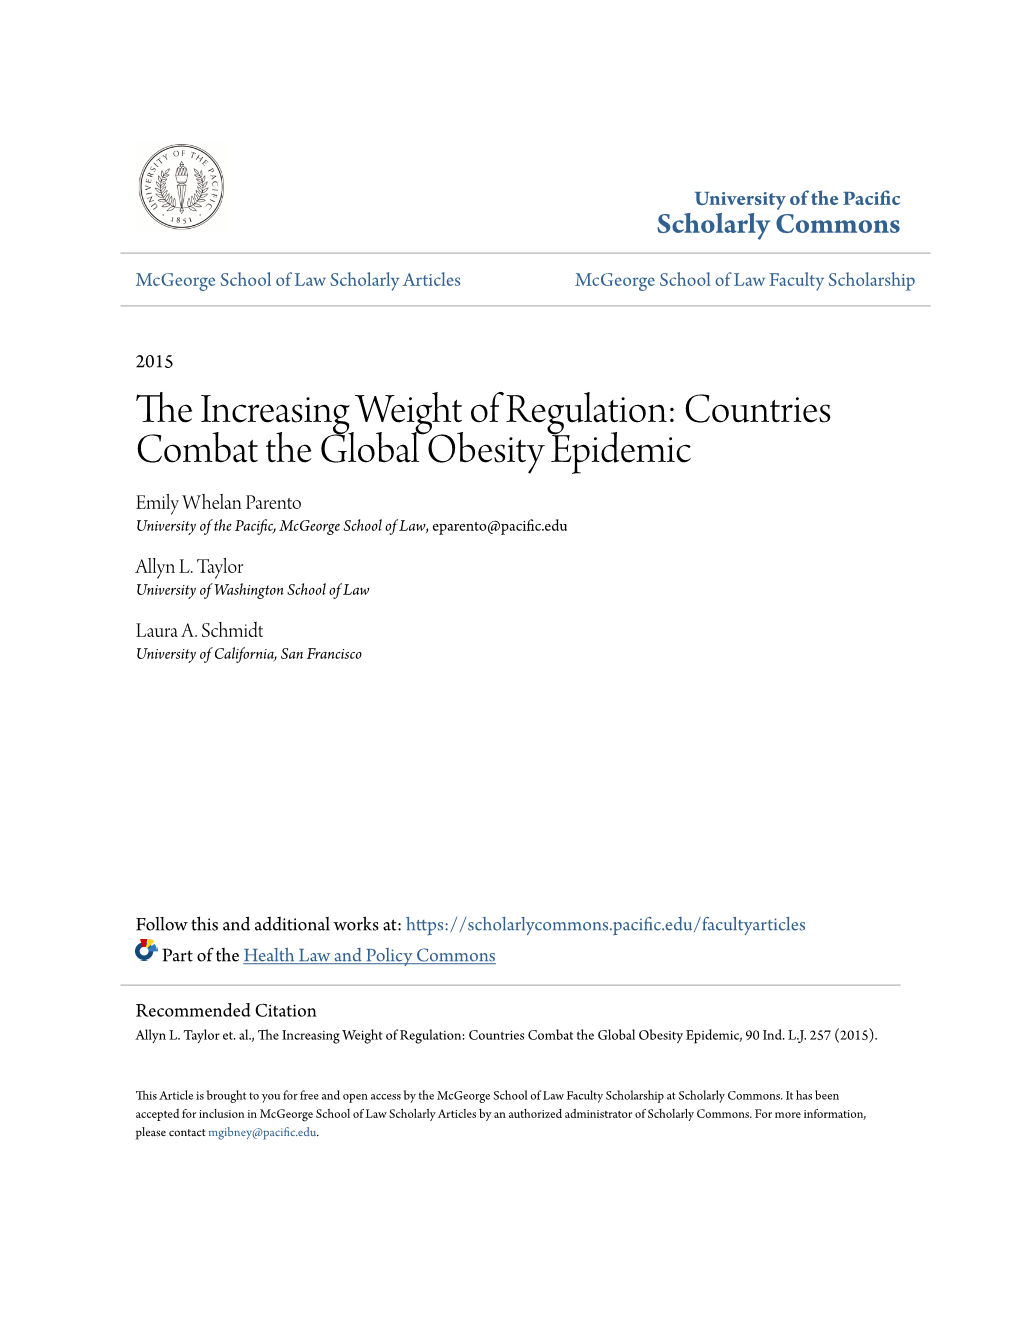 The Increasing Weight of Regulation: Countries Combat the Global Obesity Epidemic